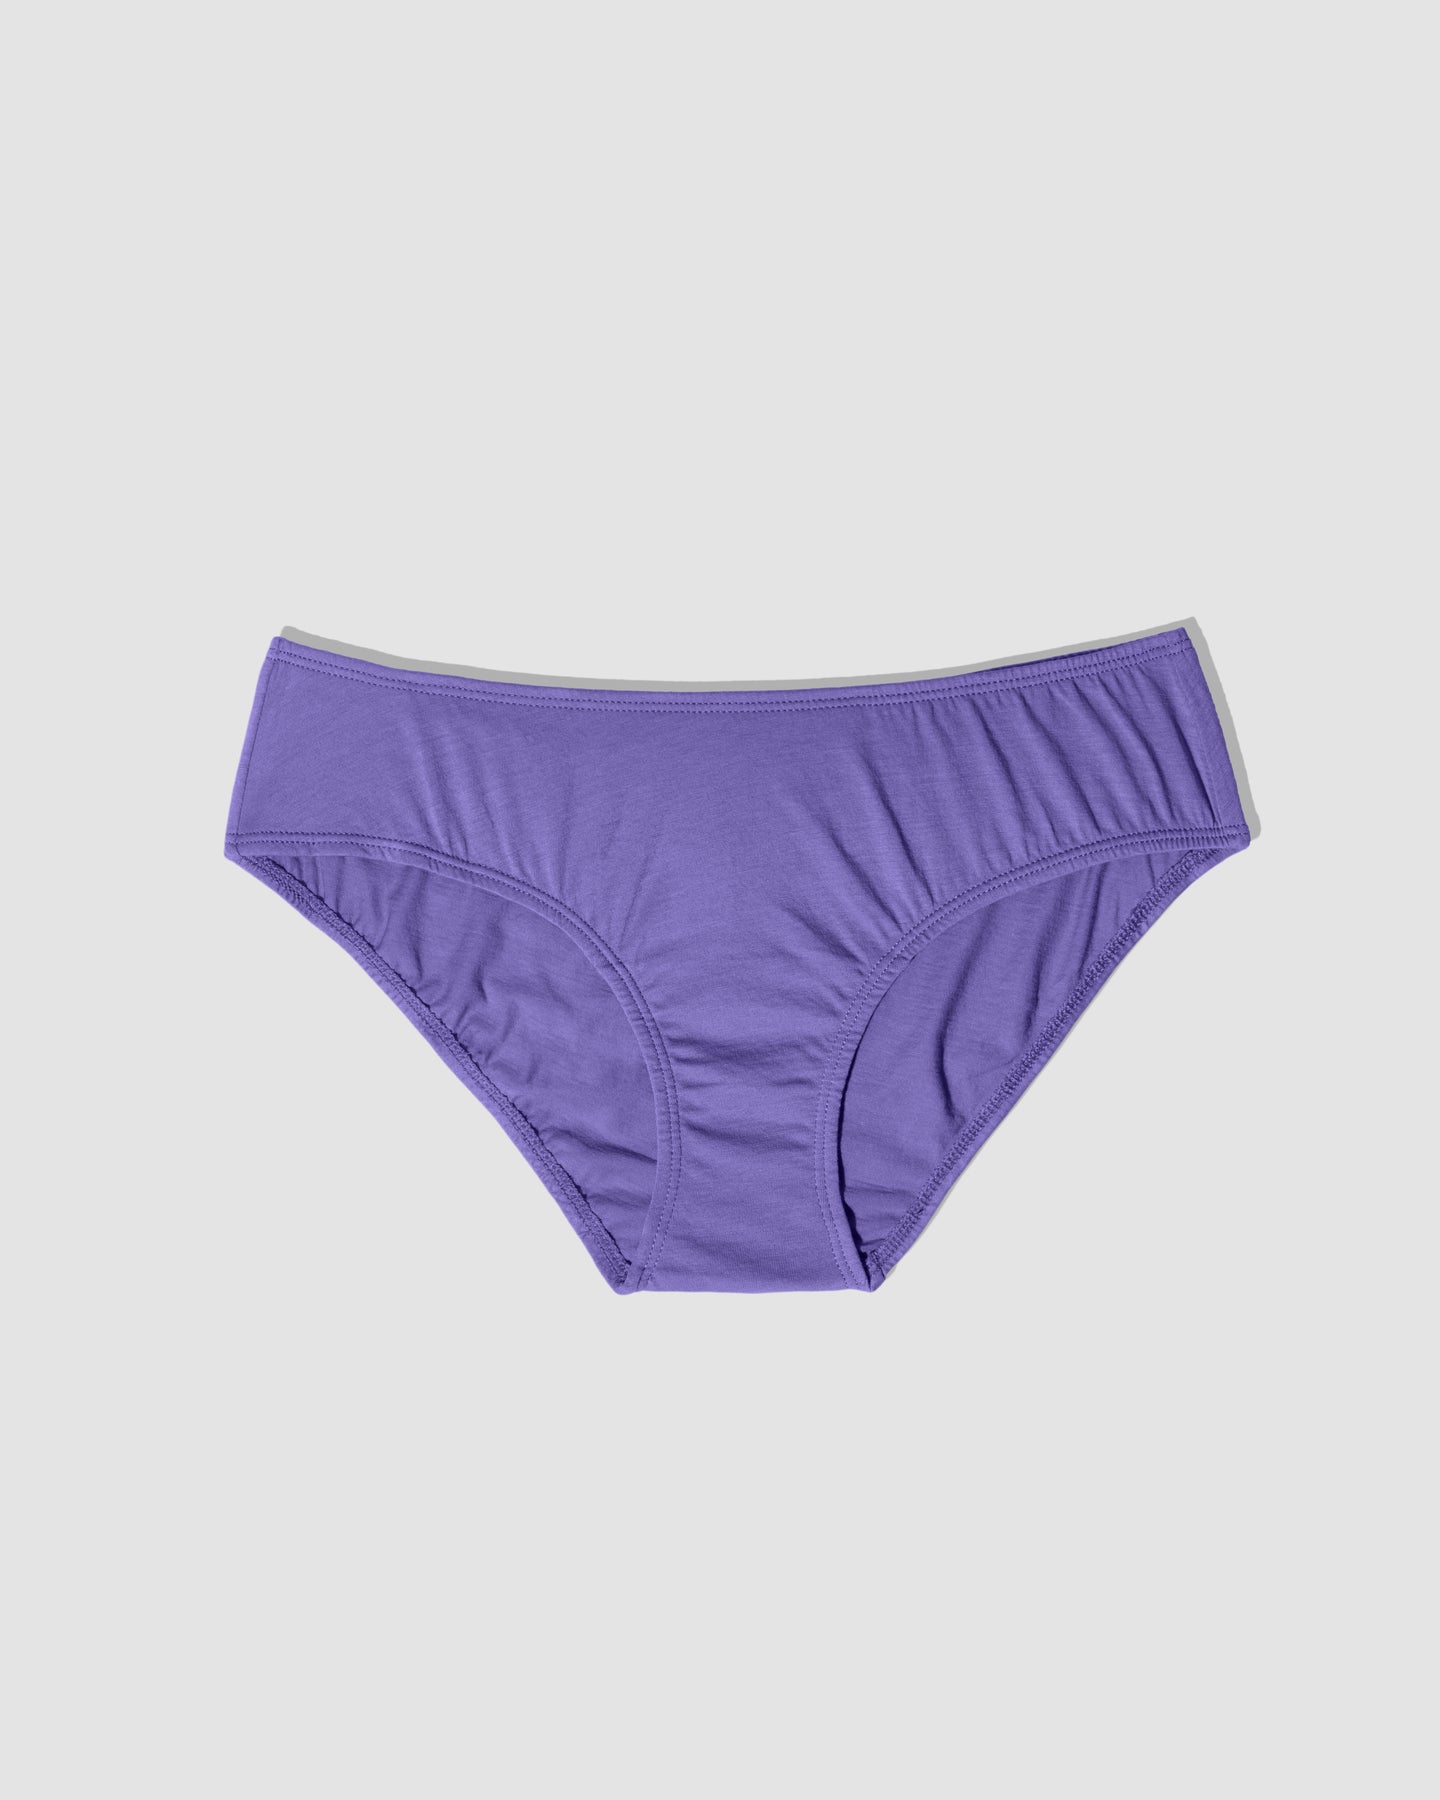 The Most Expensive Pair of Underwear I Ever Bought • Sassypants Design